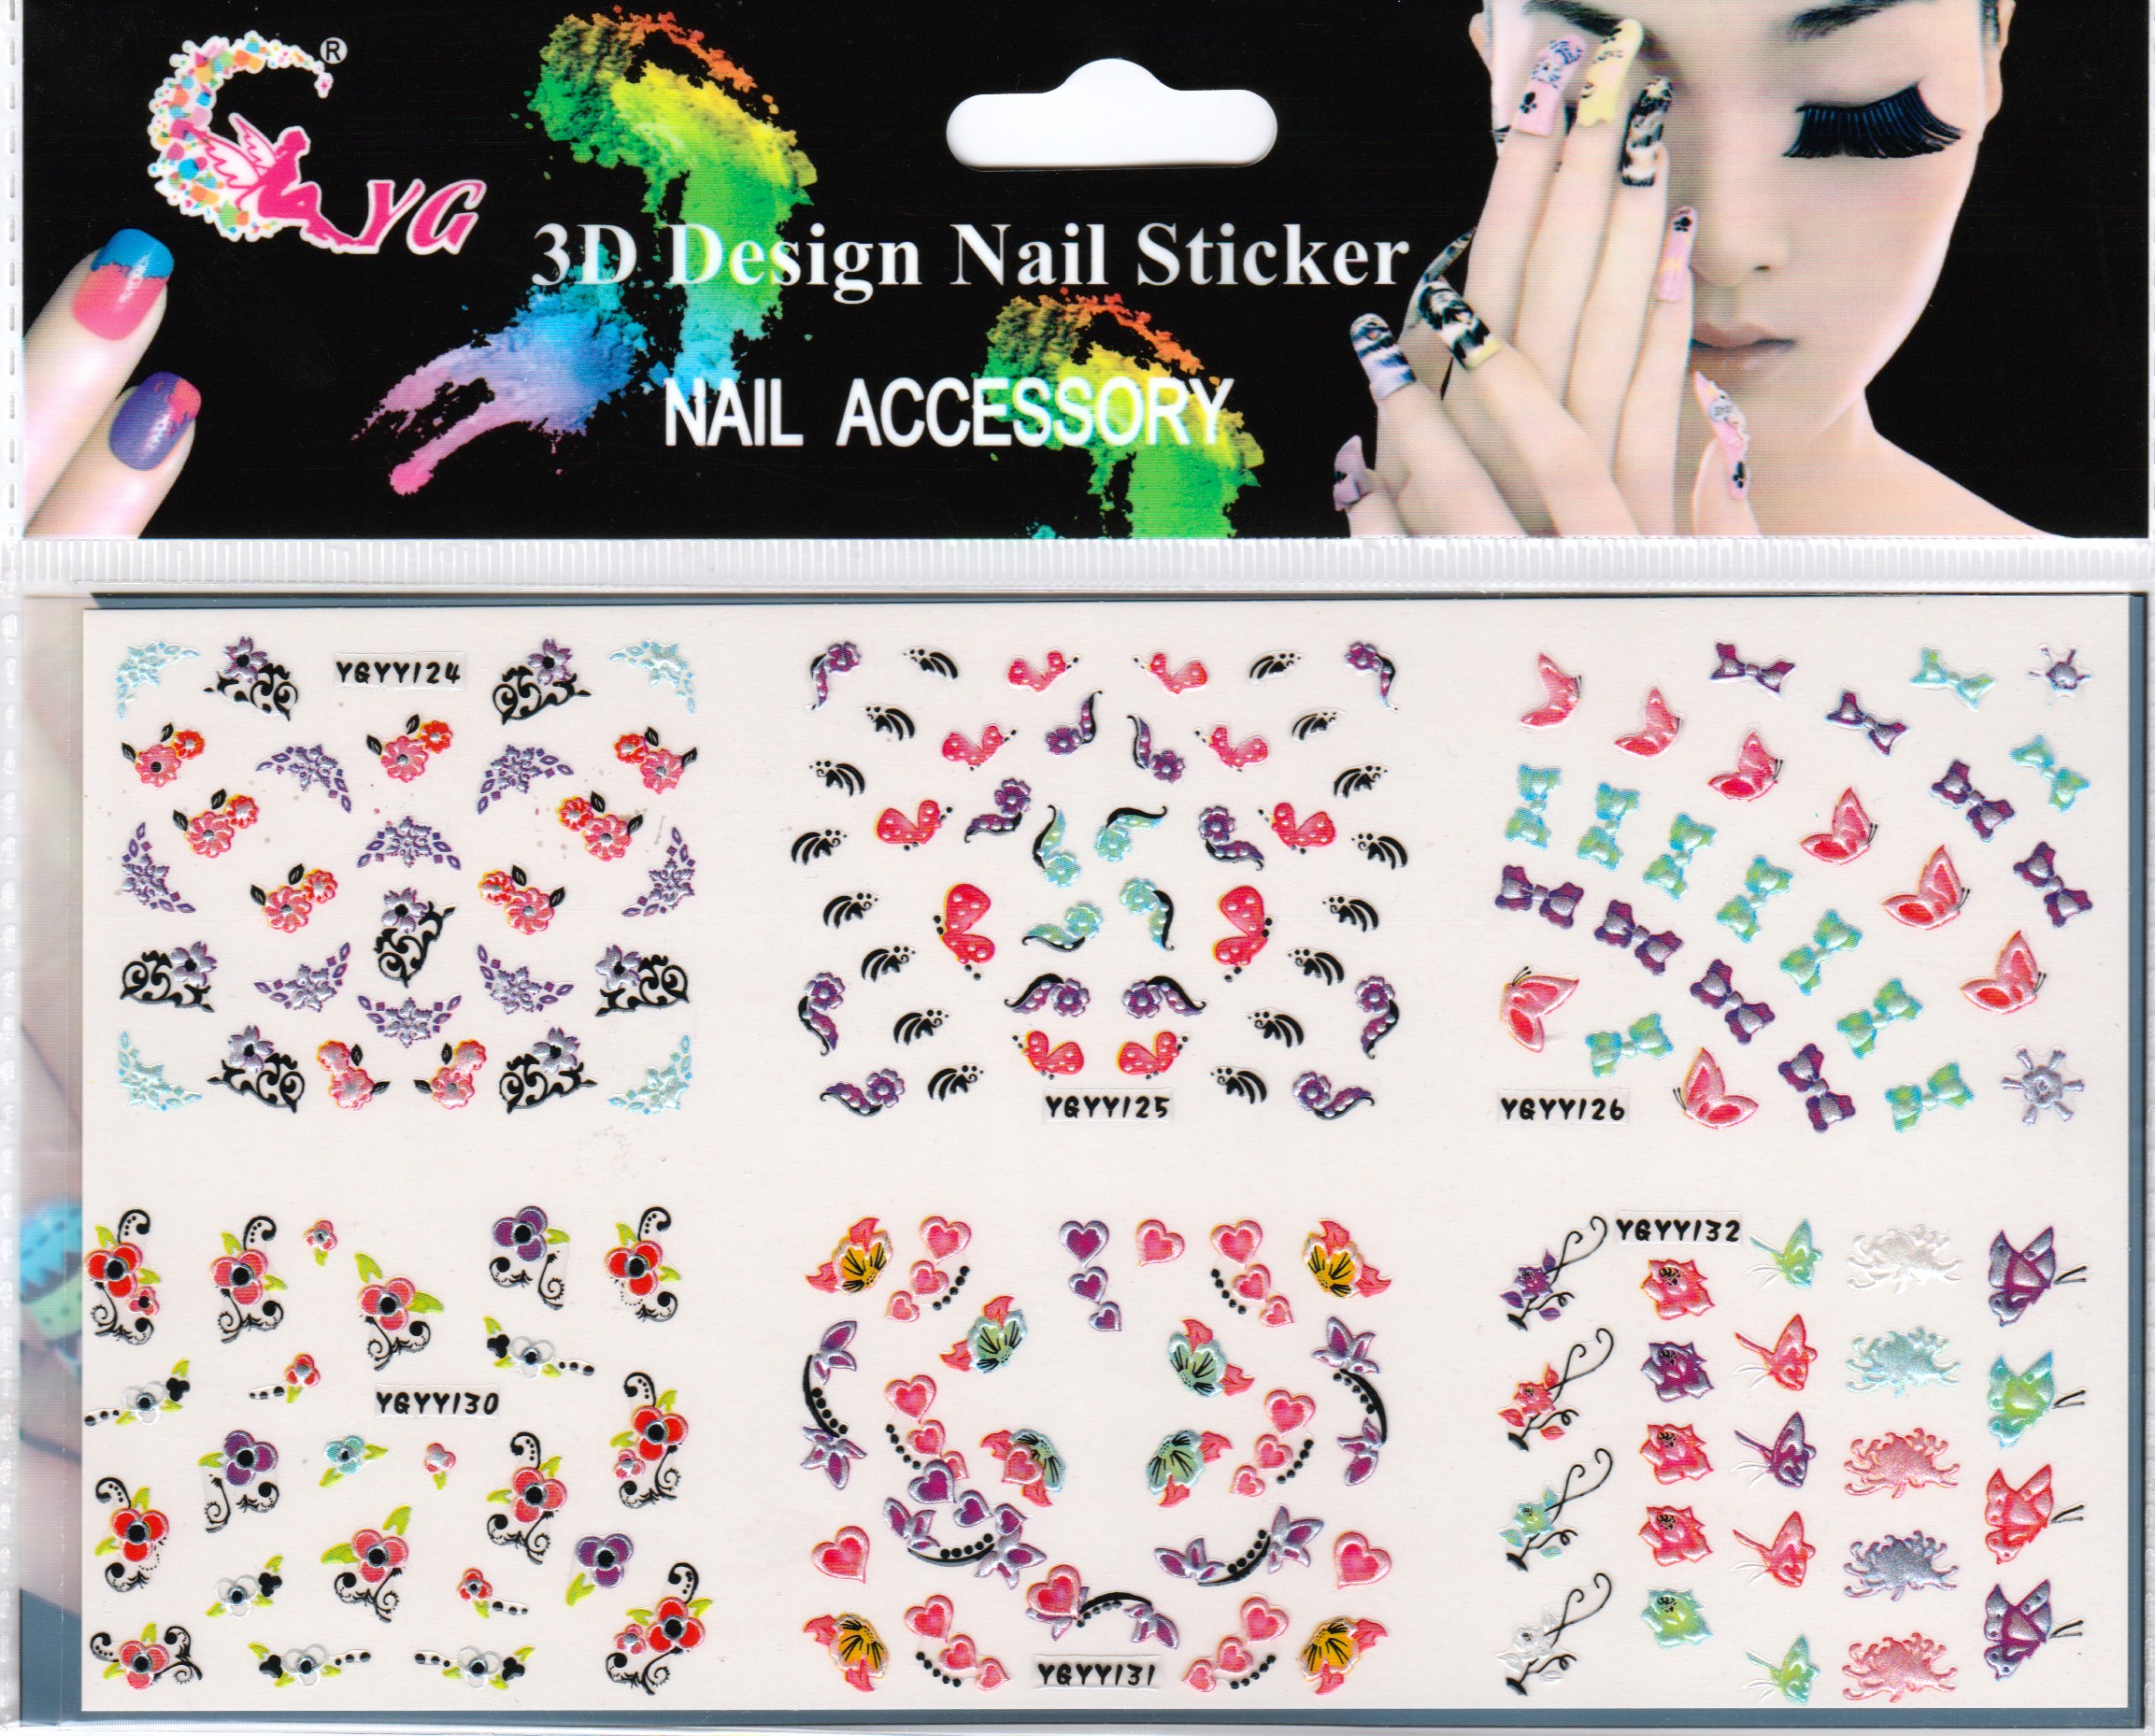 3. Lettering Nail Art Decals - wide 1